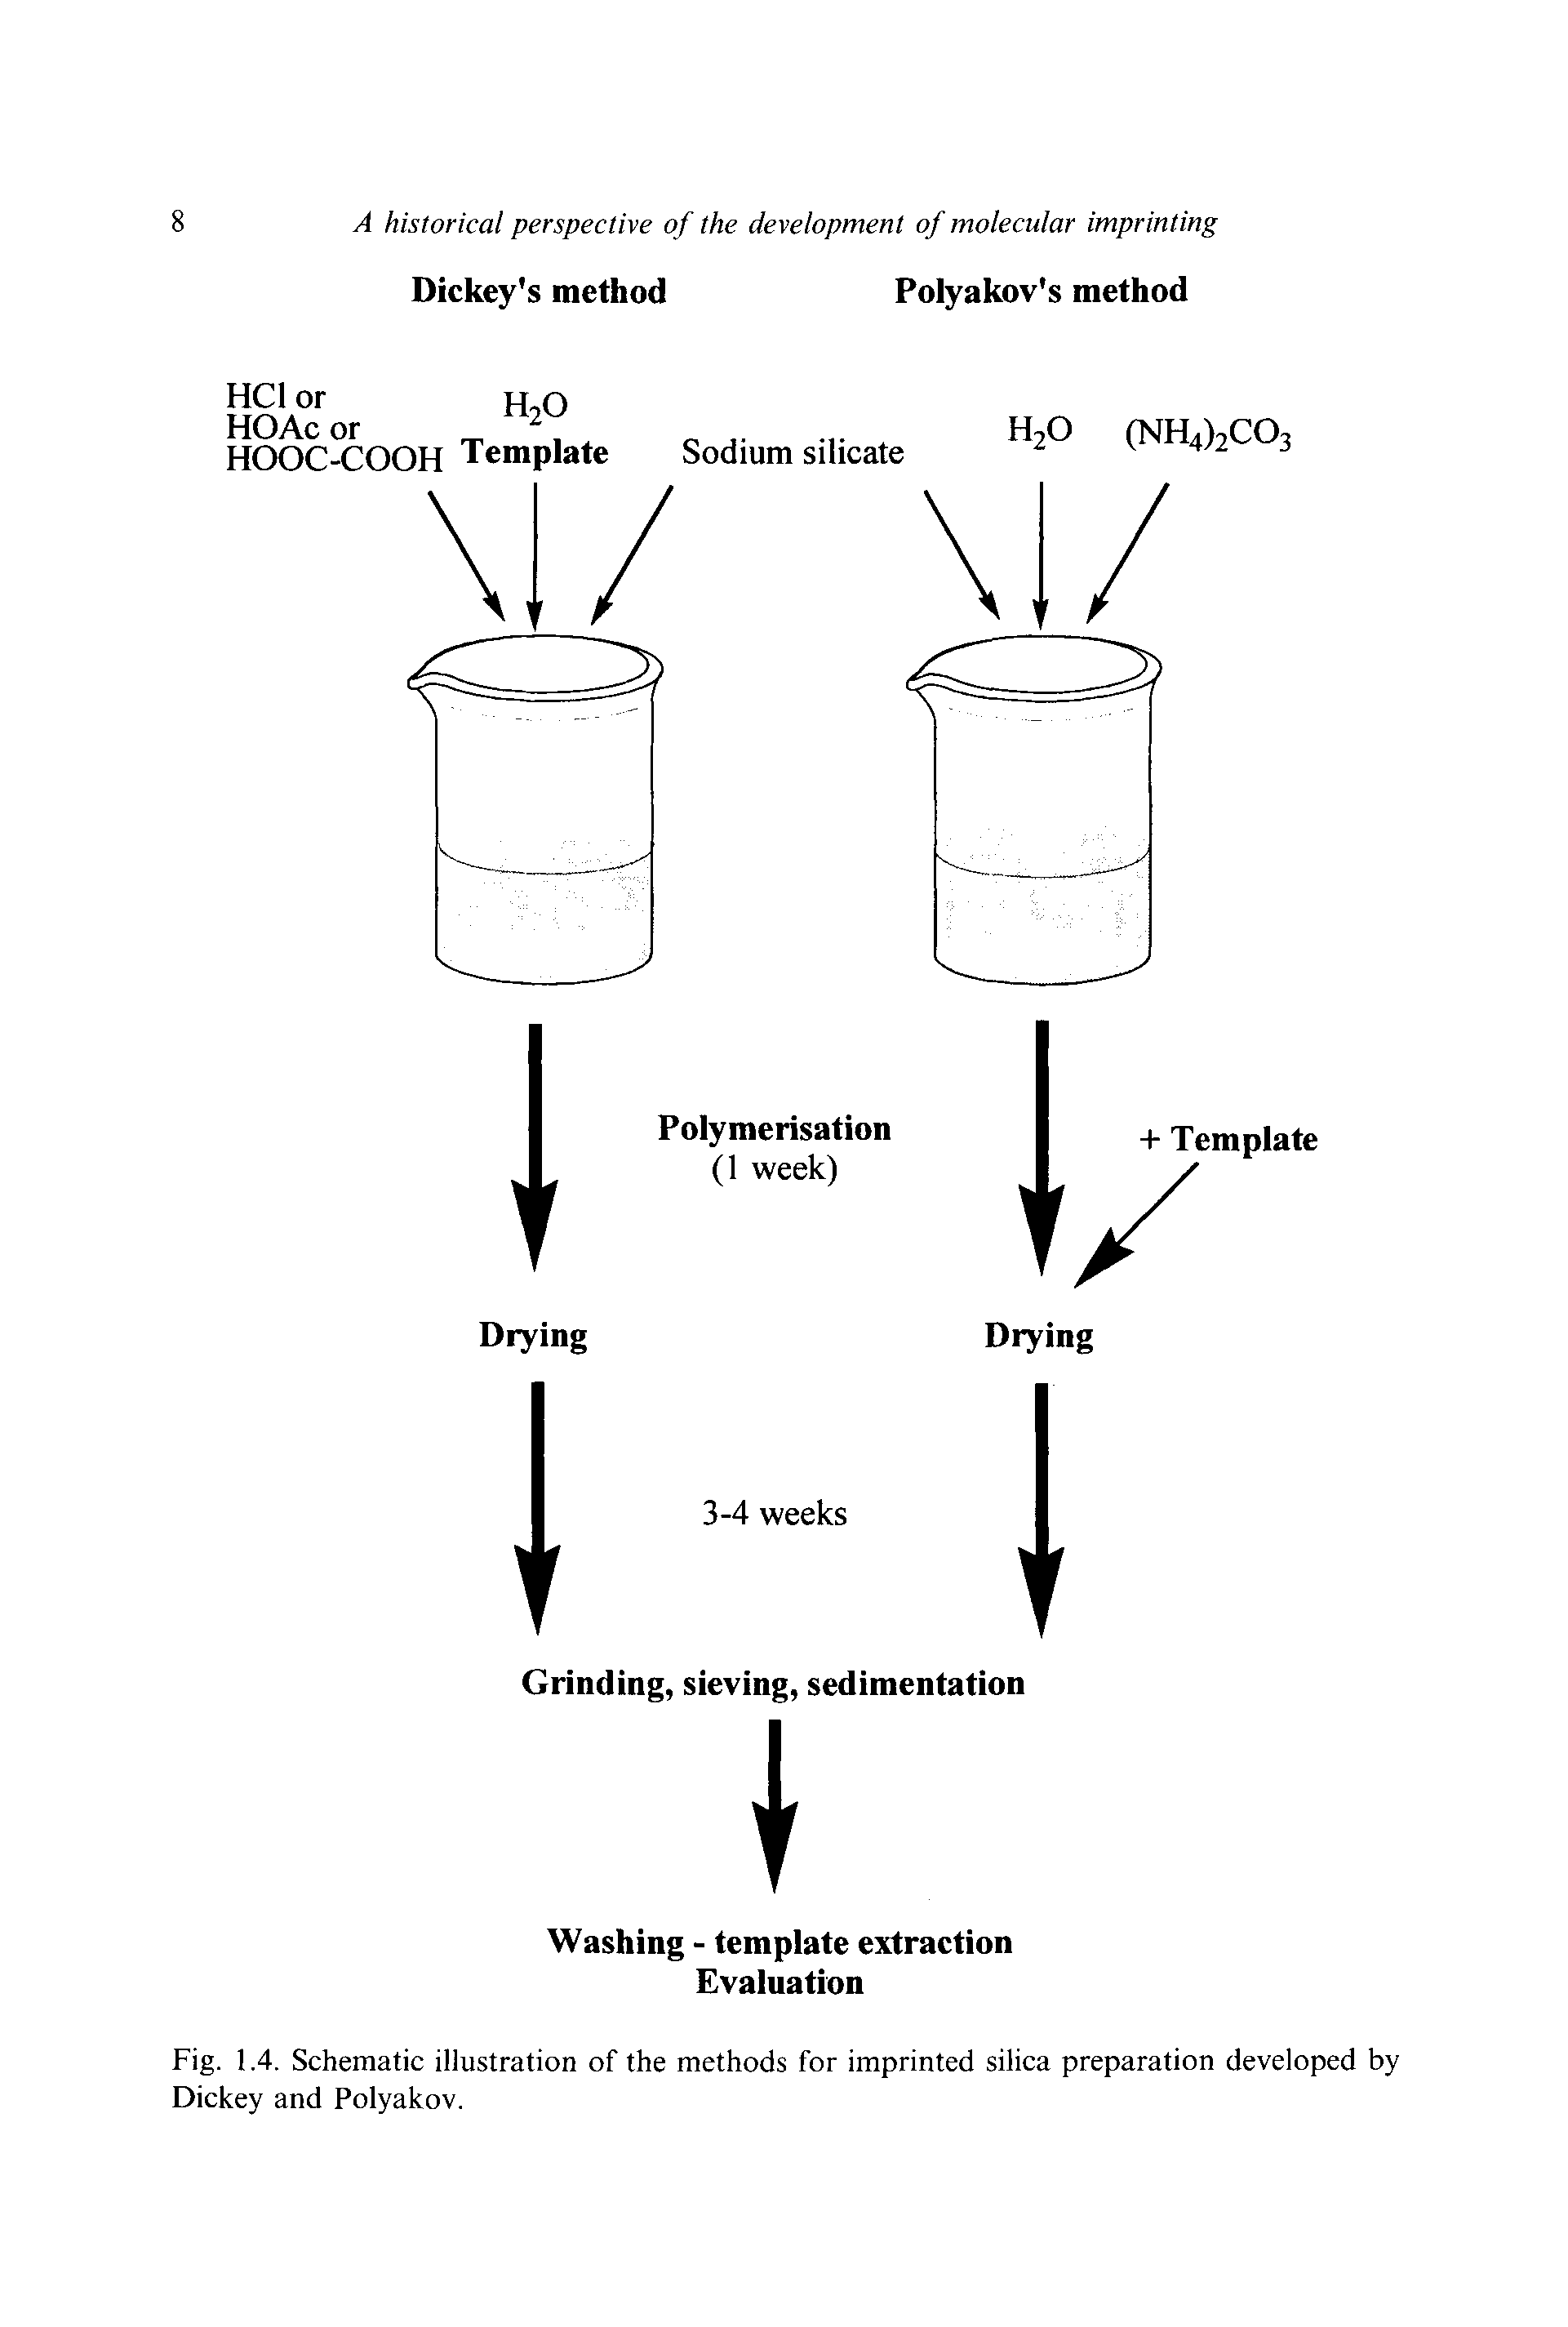 Fig. 1.4. Schematic illustration of the methods for imprinted silica preparation developed by Dickey and Polyakov.